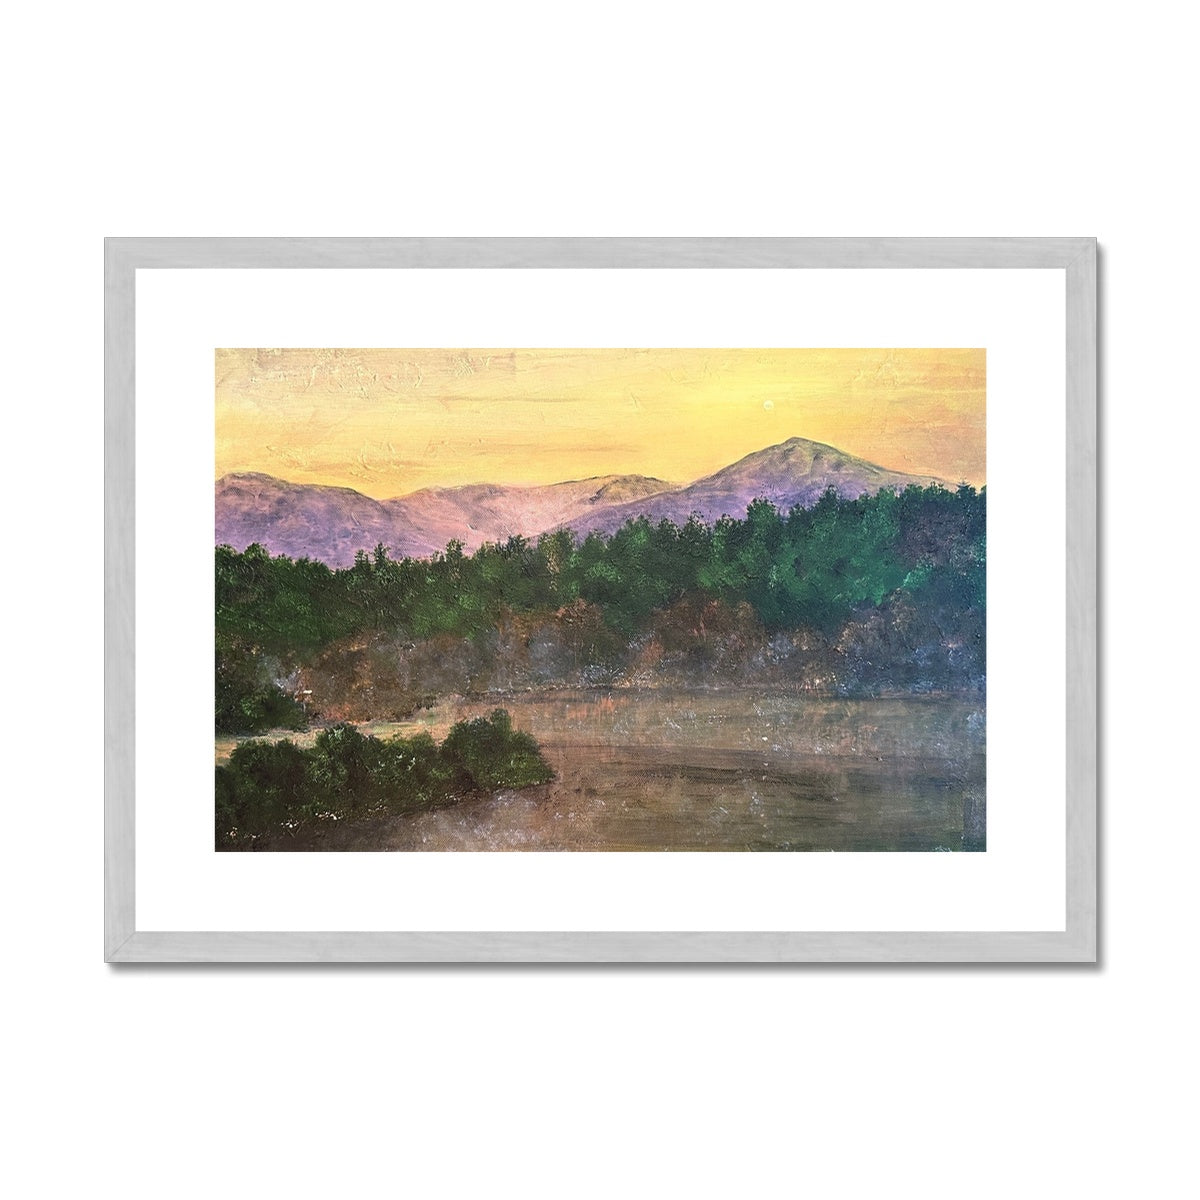 Ben Tee Invergarry Painting | Antique Framed & Mounted Prints From Scotland-Antique Framed & Mounted Prints-Scottish Lochs & Mountains Art Gallery-A2 Landscape-Silver Frame-Paintings, Prints, Homeware, Art Gifts From Scotland By Scottish Artist Kevin Hunter